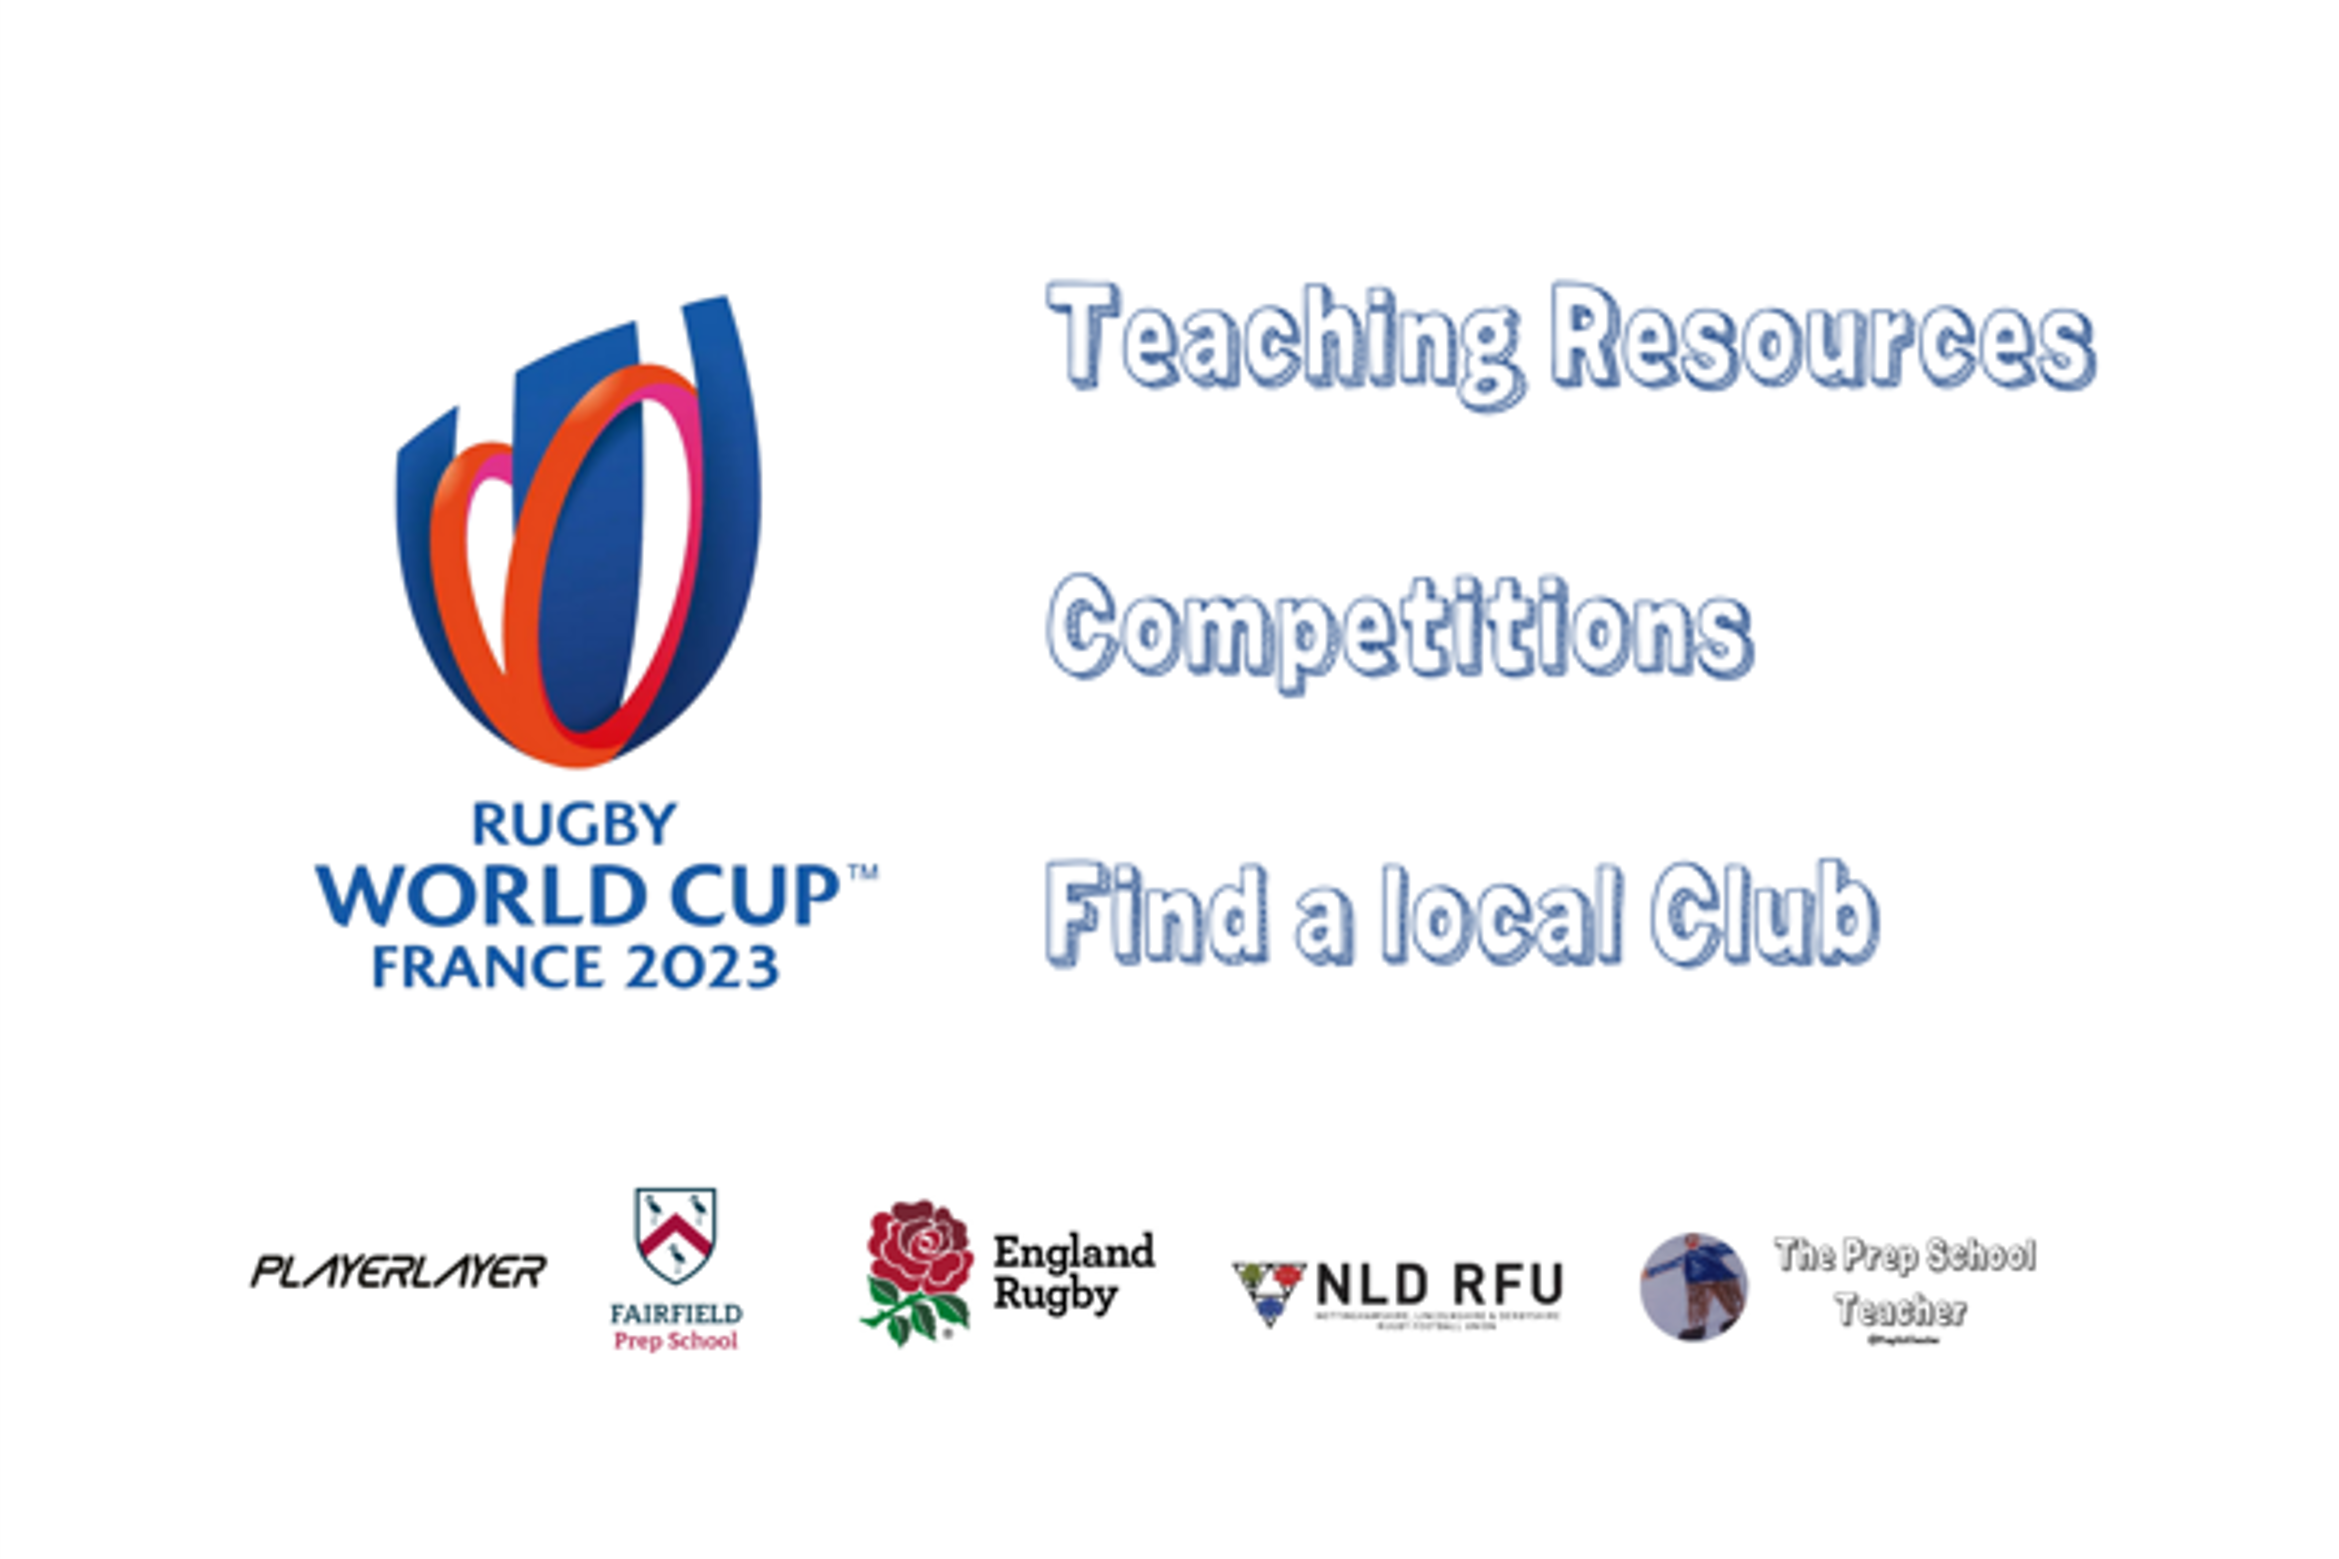 RWC & WXV Competitions and Teaching Resources